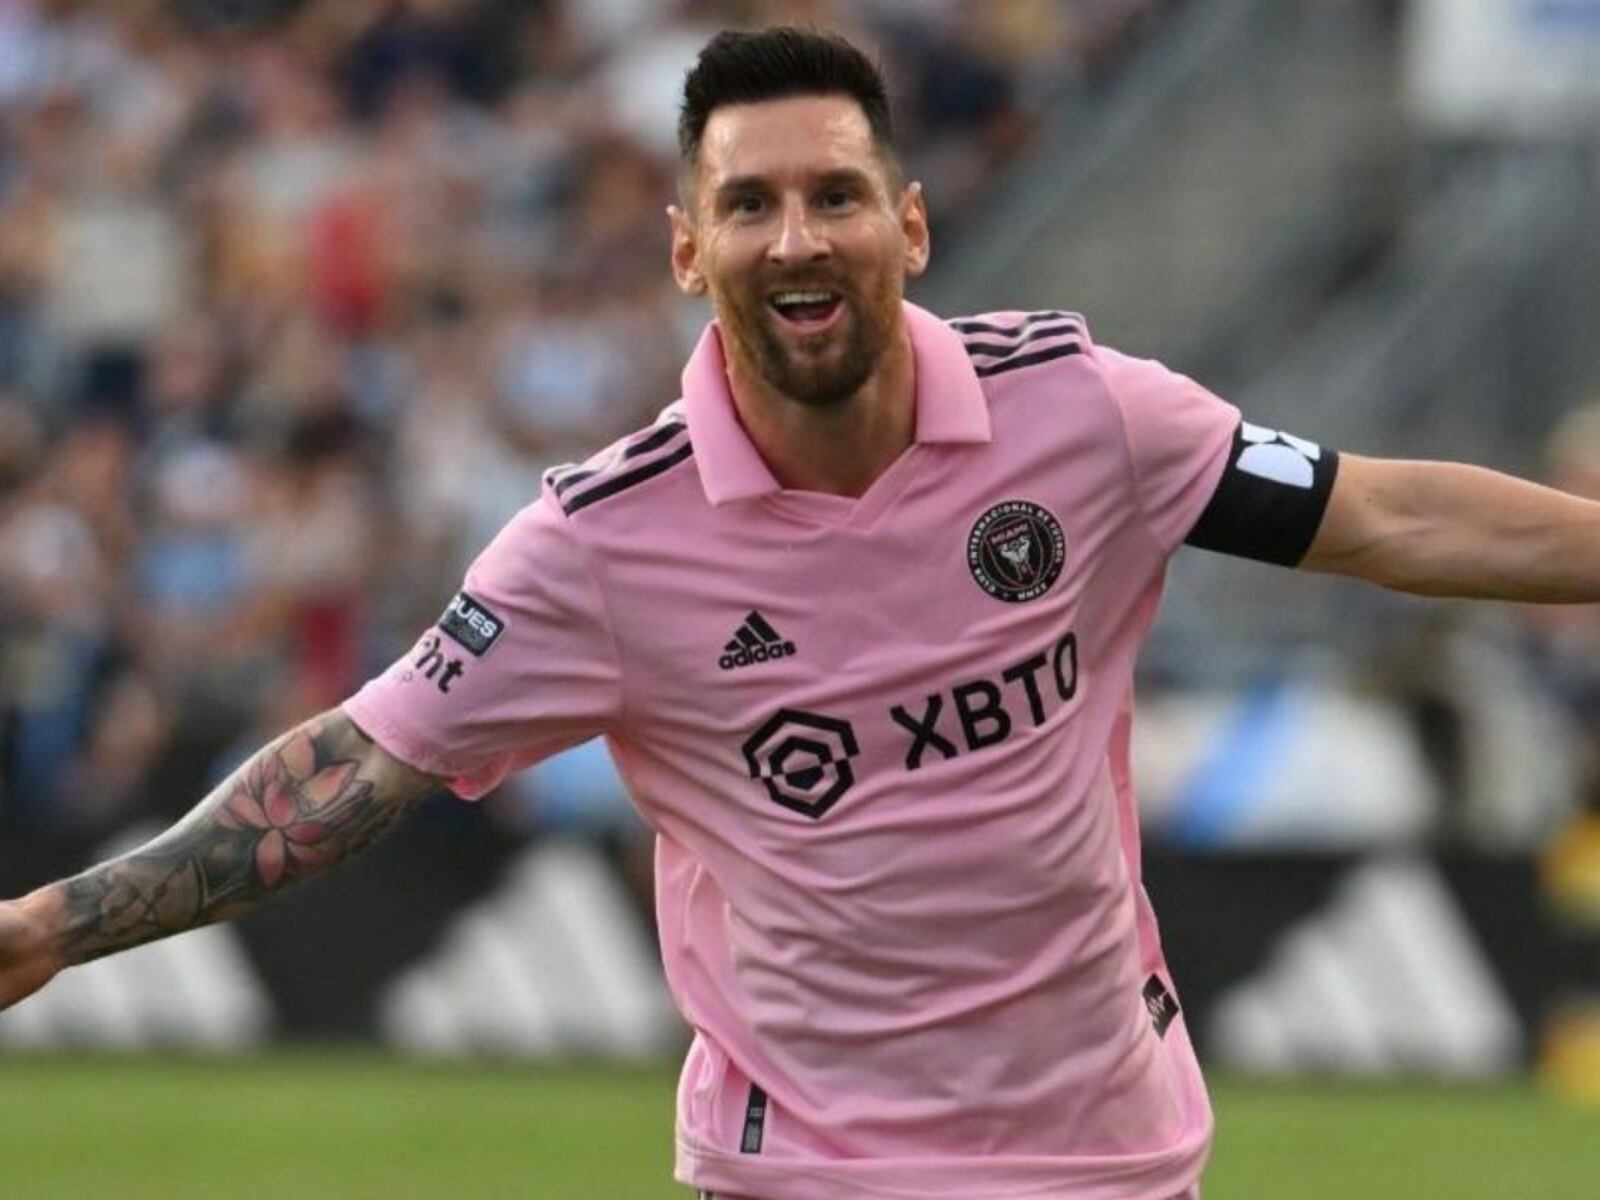 It was not for money, the real reason that brought Messi to Inter Miami